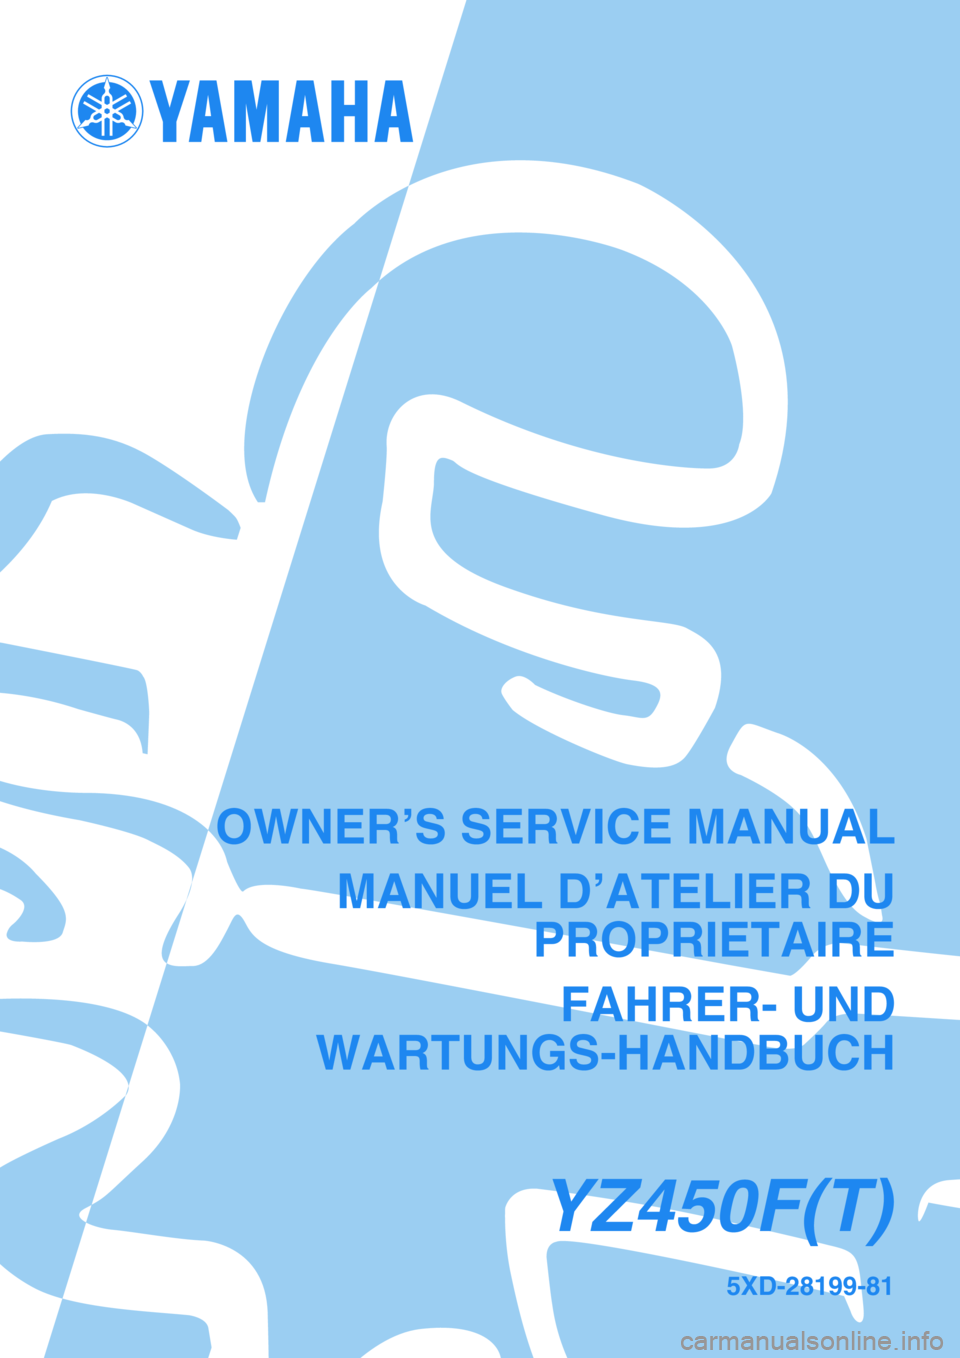 YAMAHA YZ450F 2005  Notices Demploi (in French) 5XD-28199-81
YZ450F(T)
OWNER’S SERVICE MANUAL
MANUEL D’ATELIER DU
PROPRIETAIRE
FAHRER- UND
WARTUNGS-HANDBUCH 